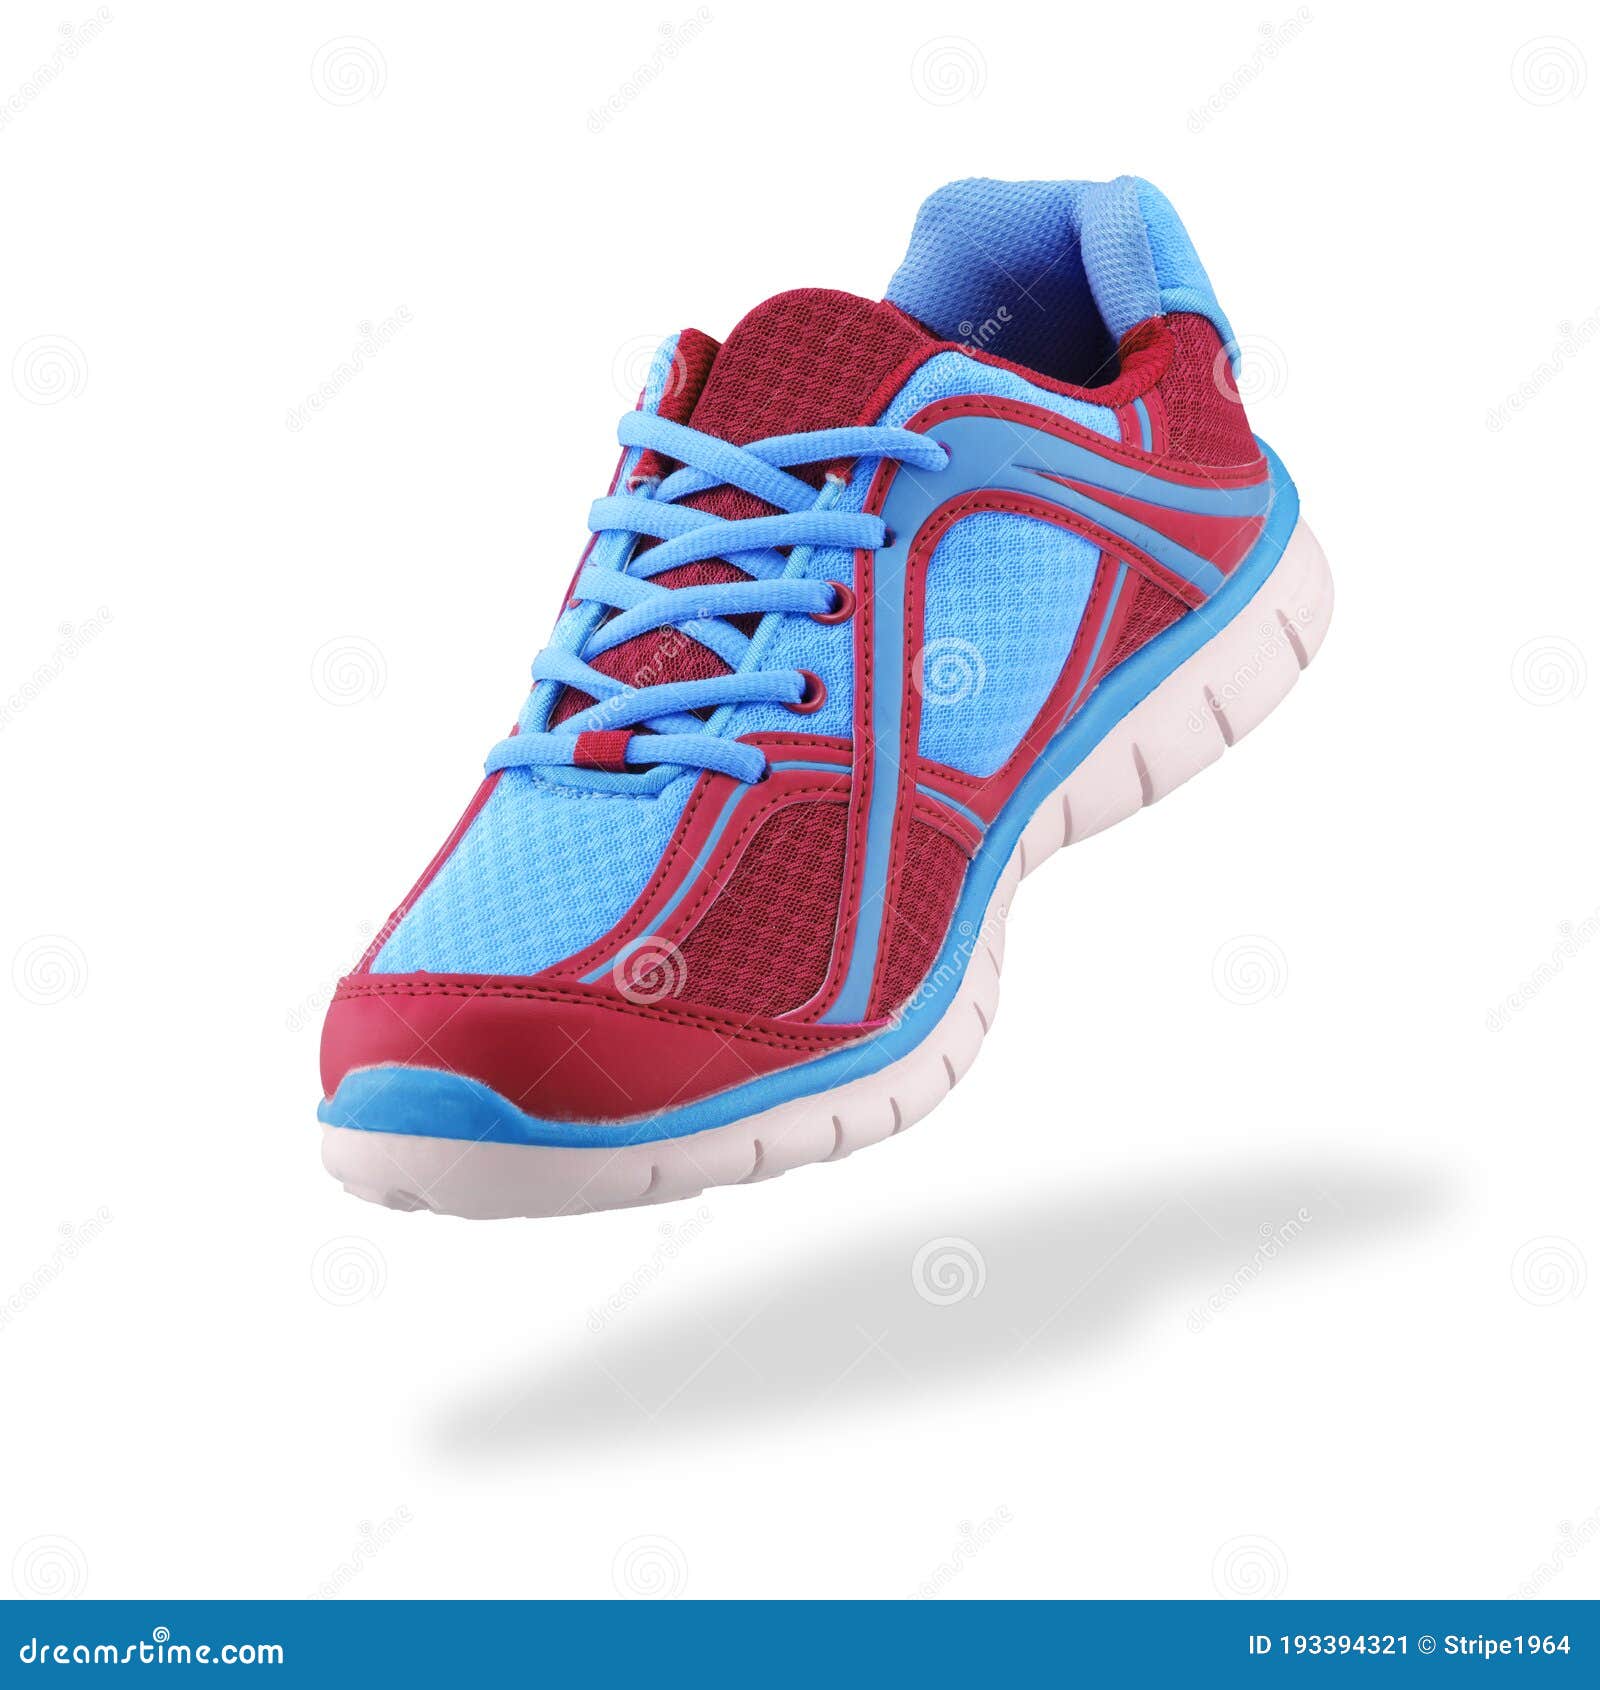 Training Shoe on White with Drop Shadow Stock Image - Image of drop ...